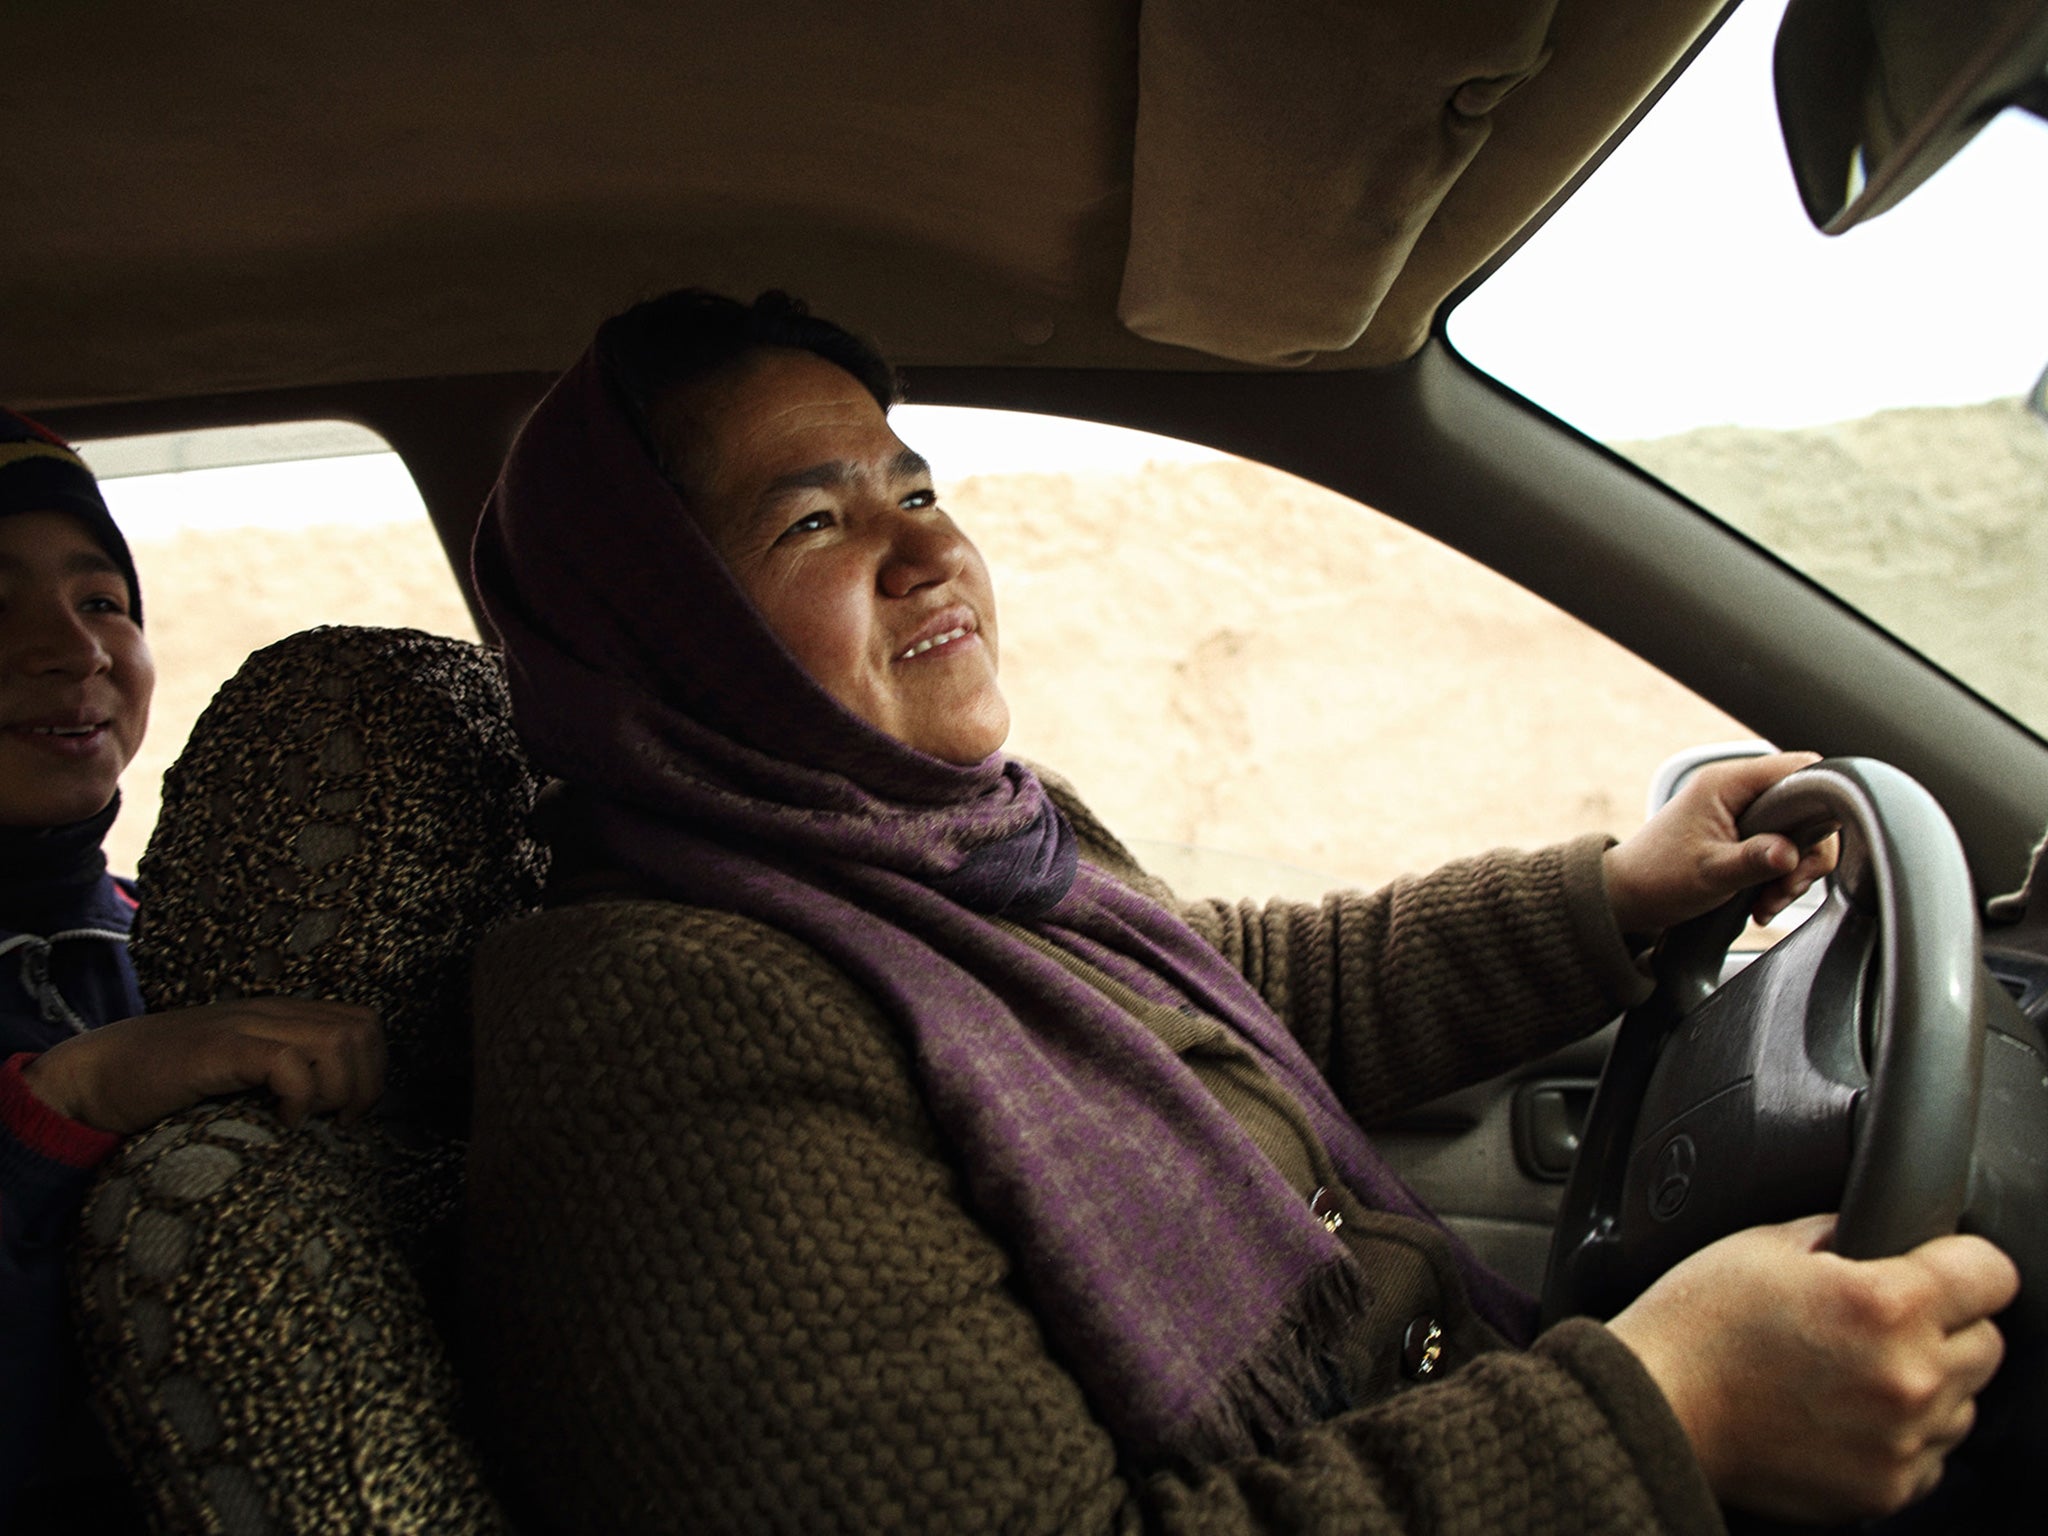 Sara Bahayi is Afghanistan’s first female taxi driver in recent memory